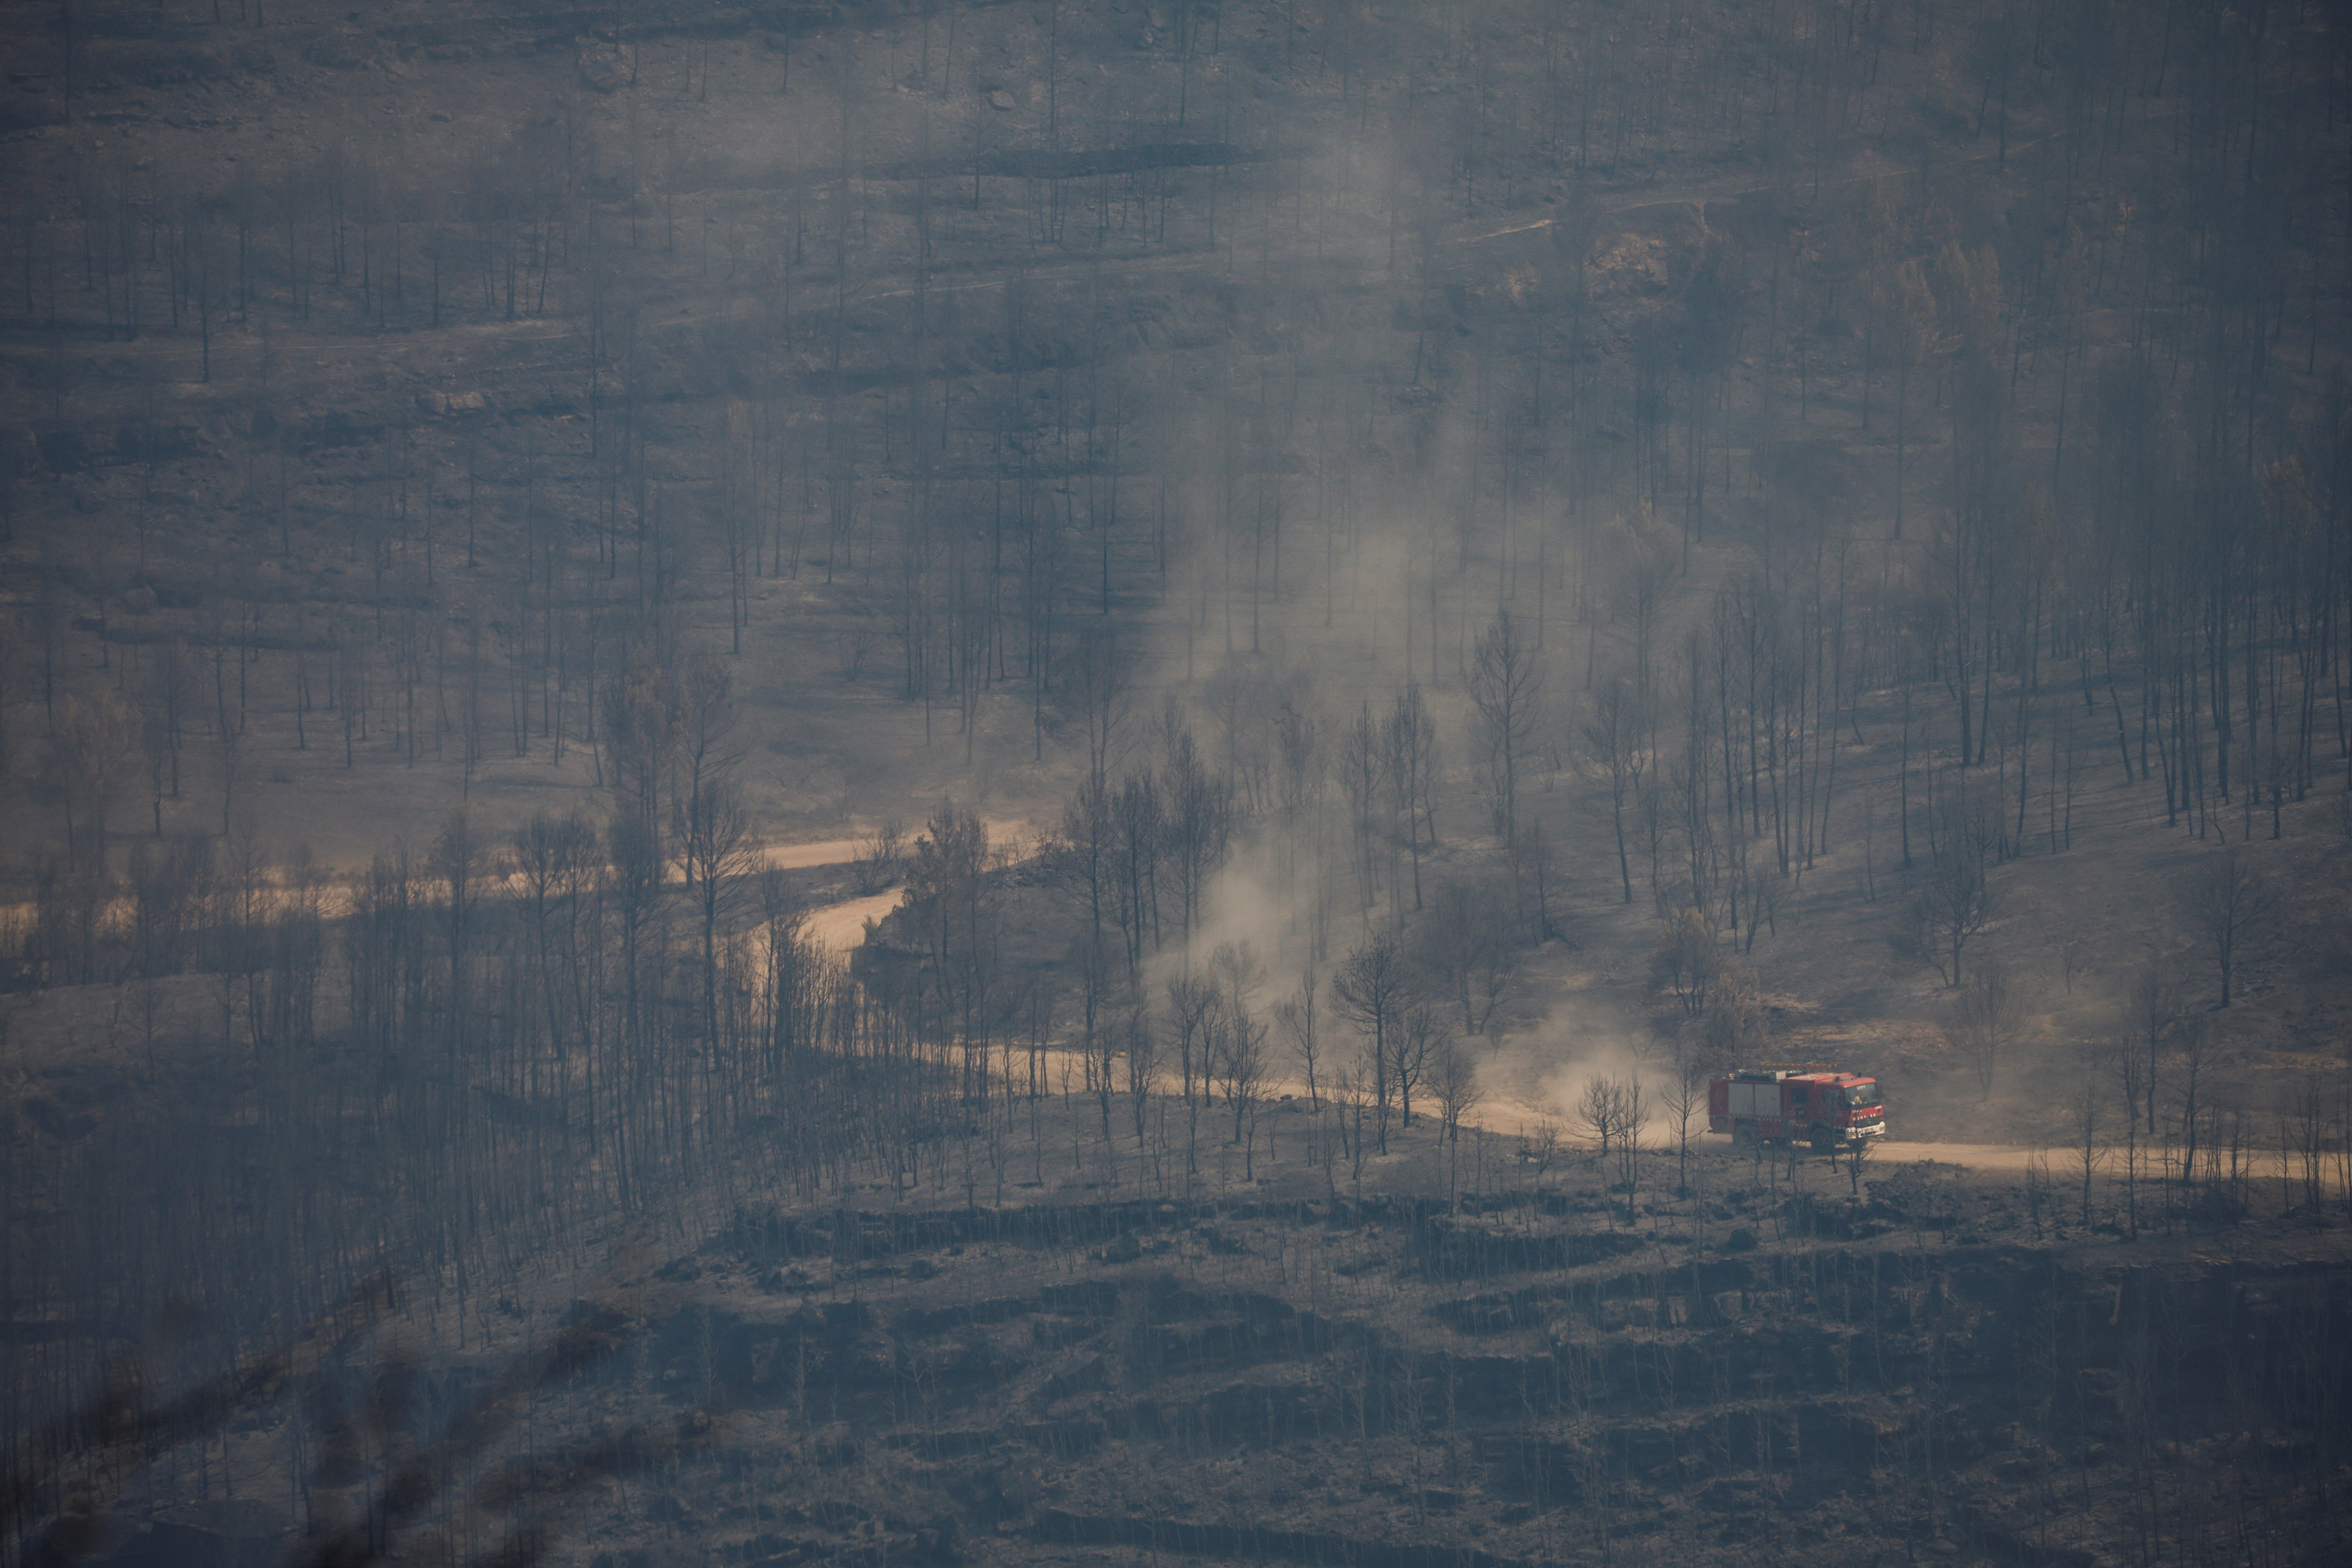 Wildfire continues to rage